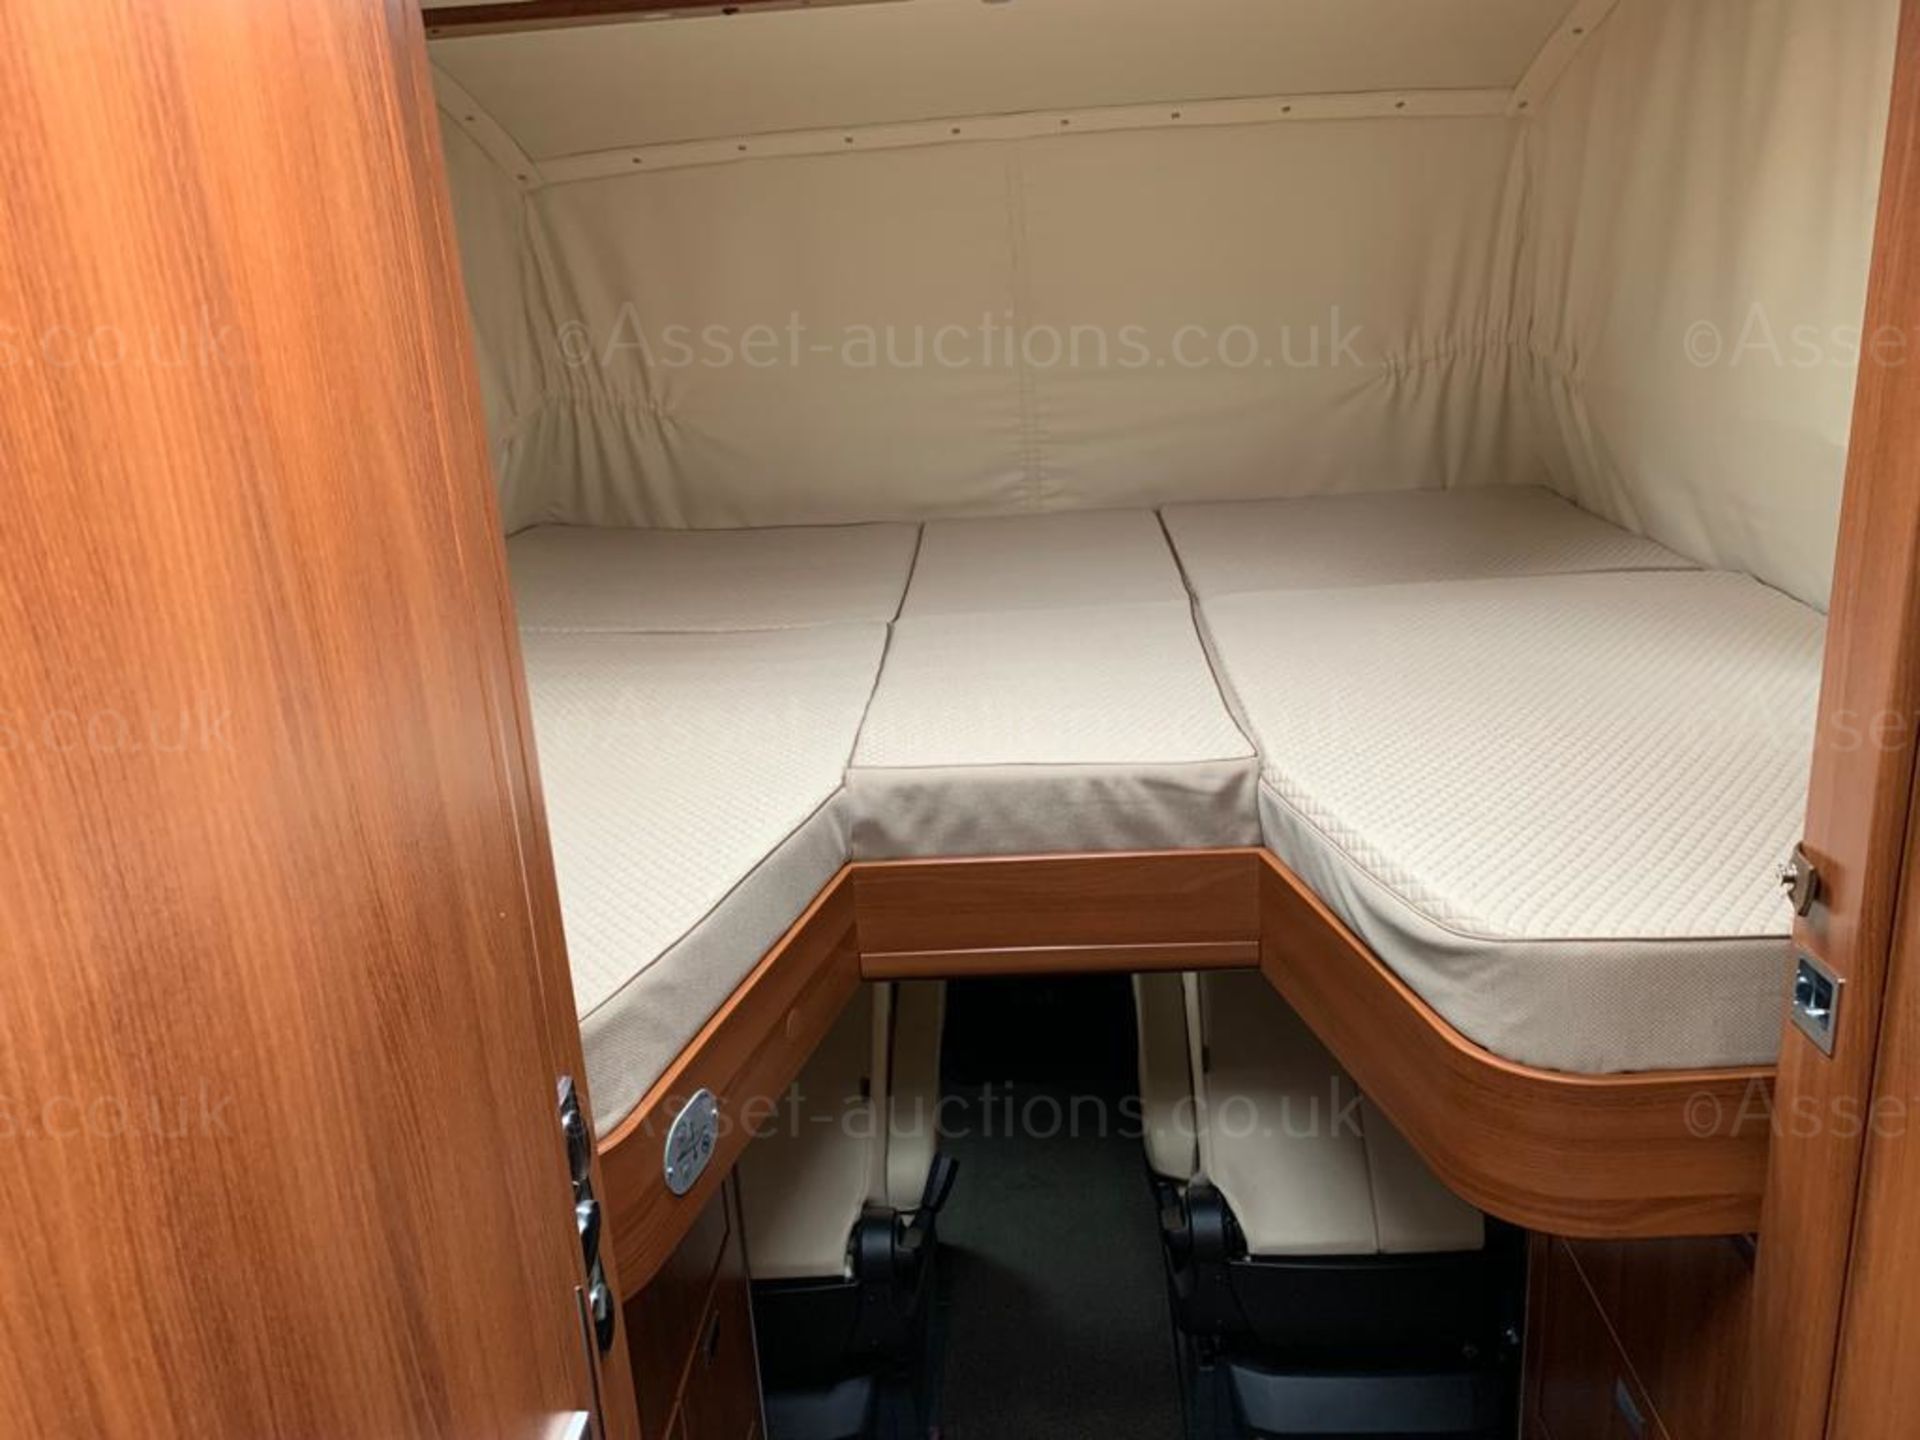 2020 CARTHAGO LINER-FOR-TWO 53L MOTORHOME, SHOWING 4529 MILES, MINT CONDITION *NO VAT* - Image 22 of 33